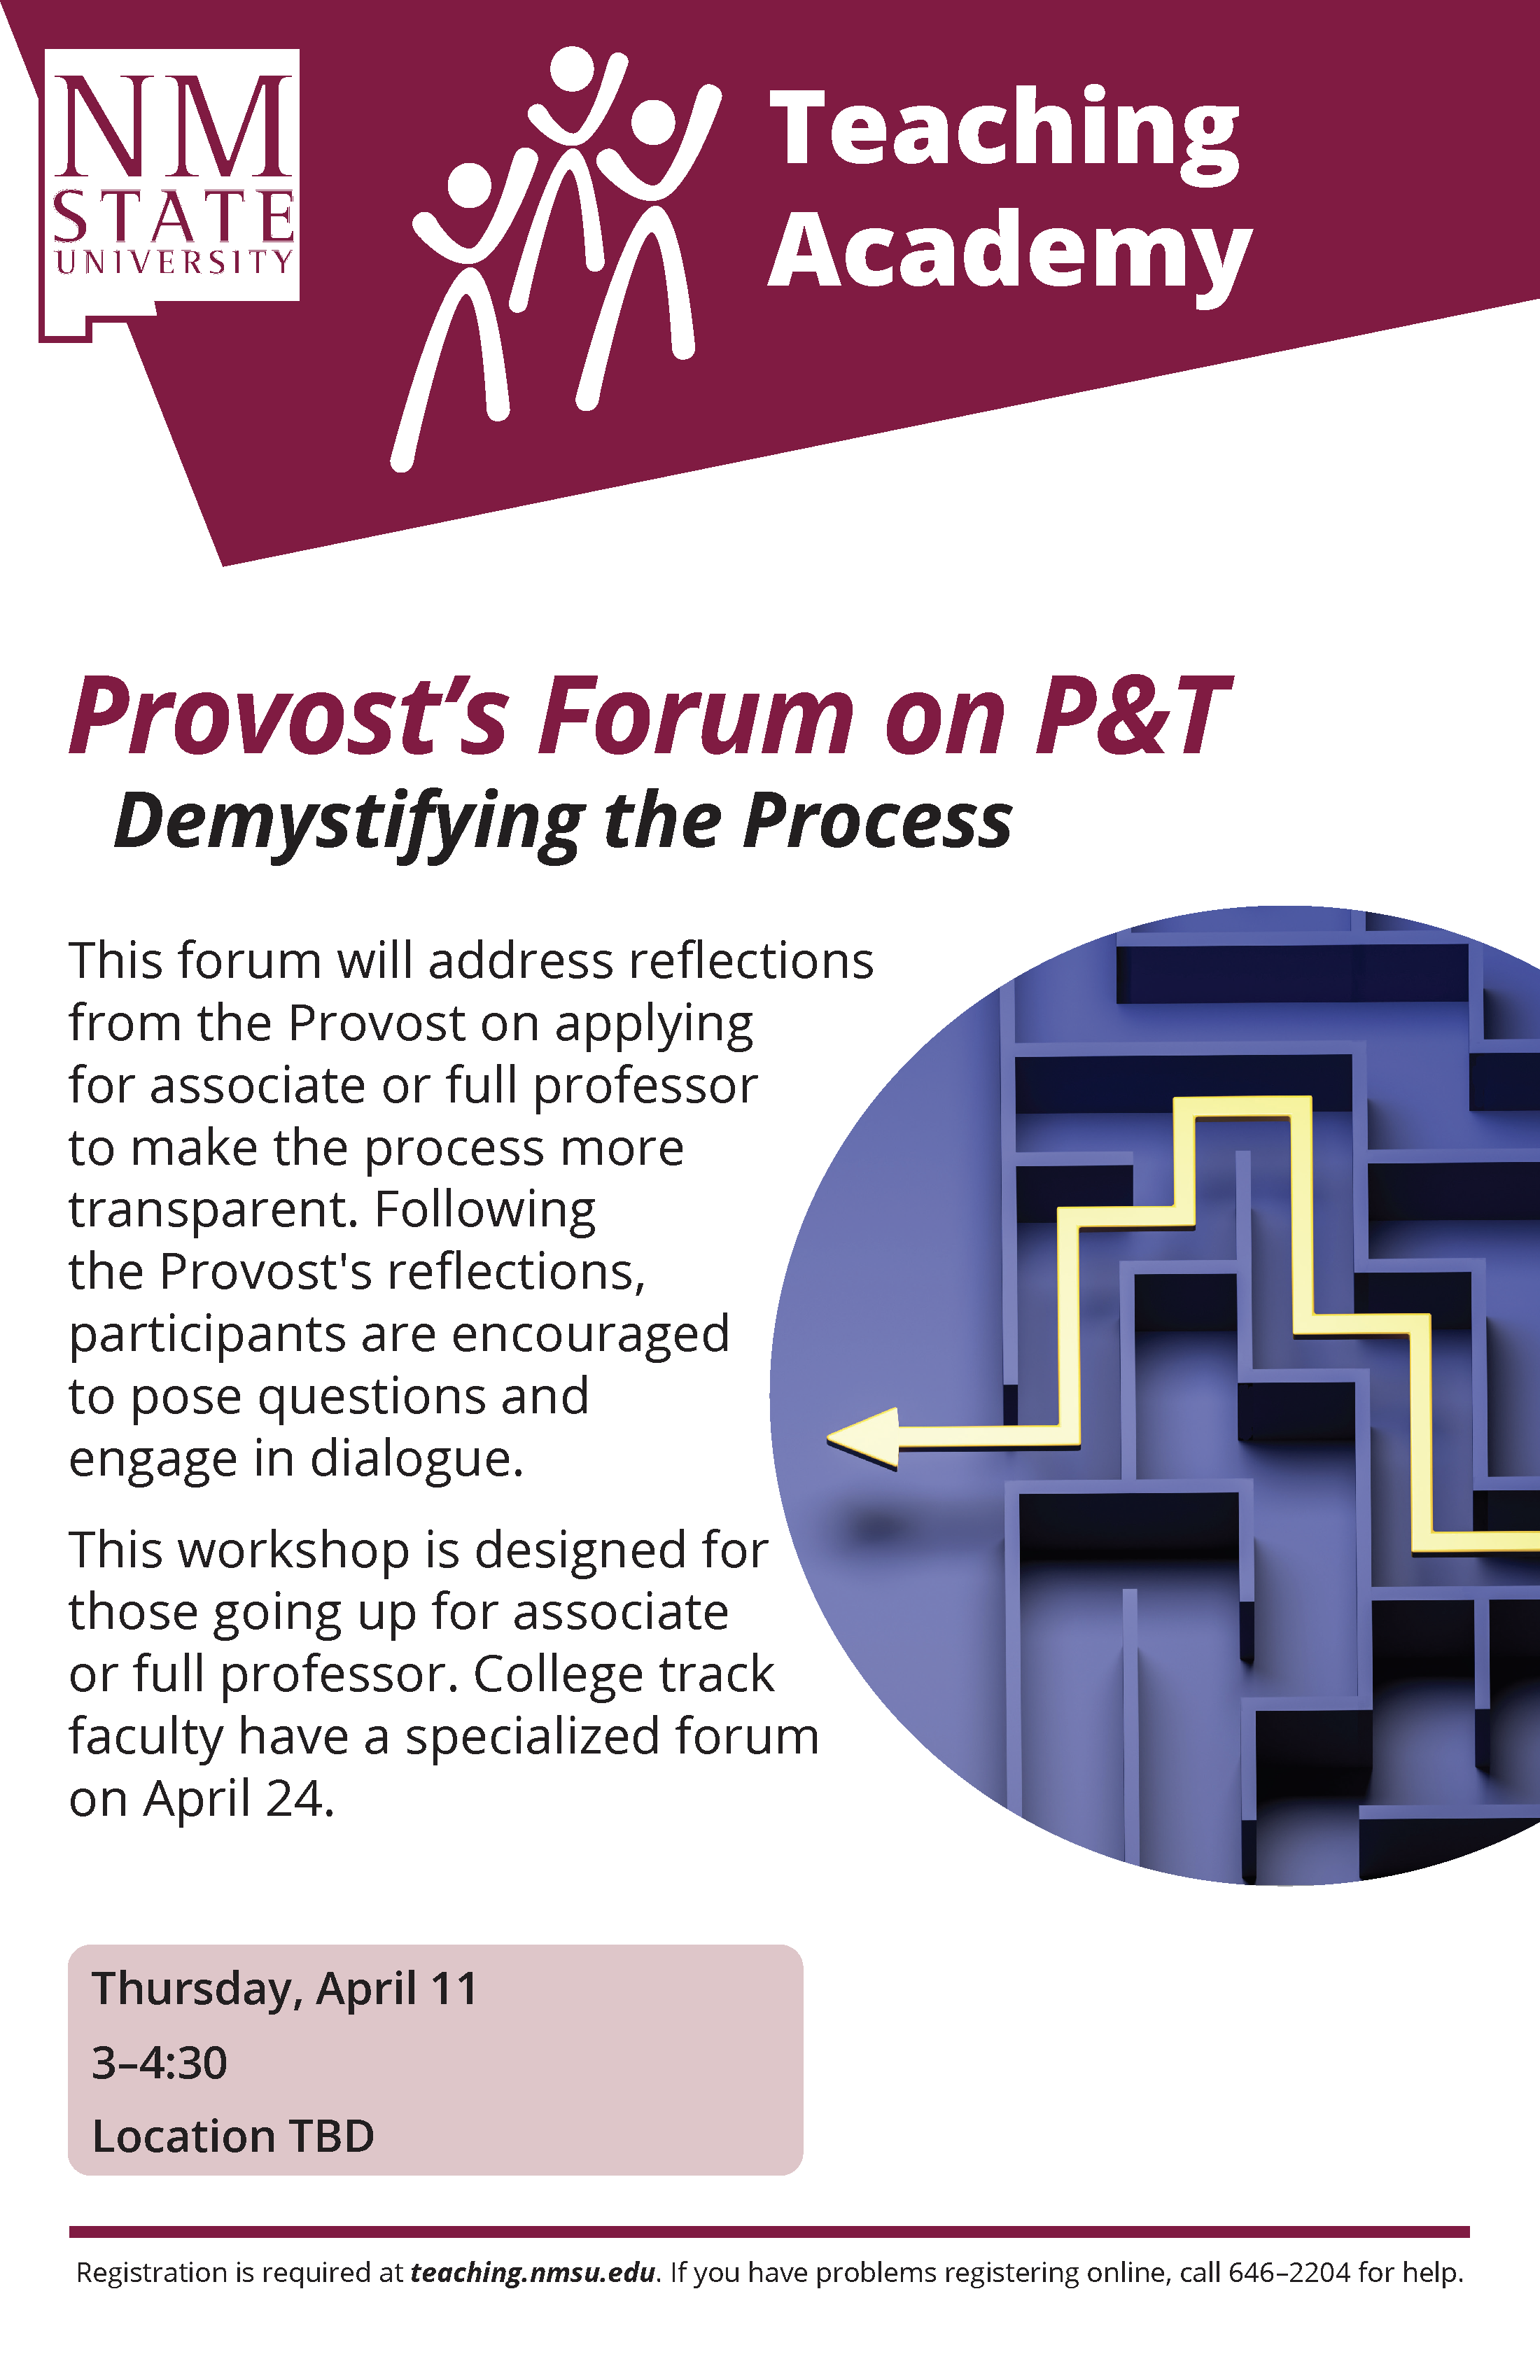 Flyer on the Provost Forum on P&T with the Teaching Academy.